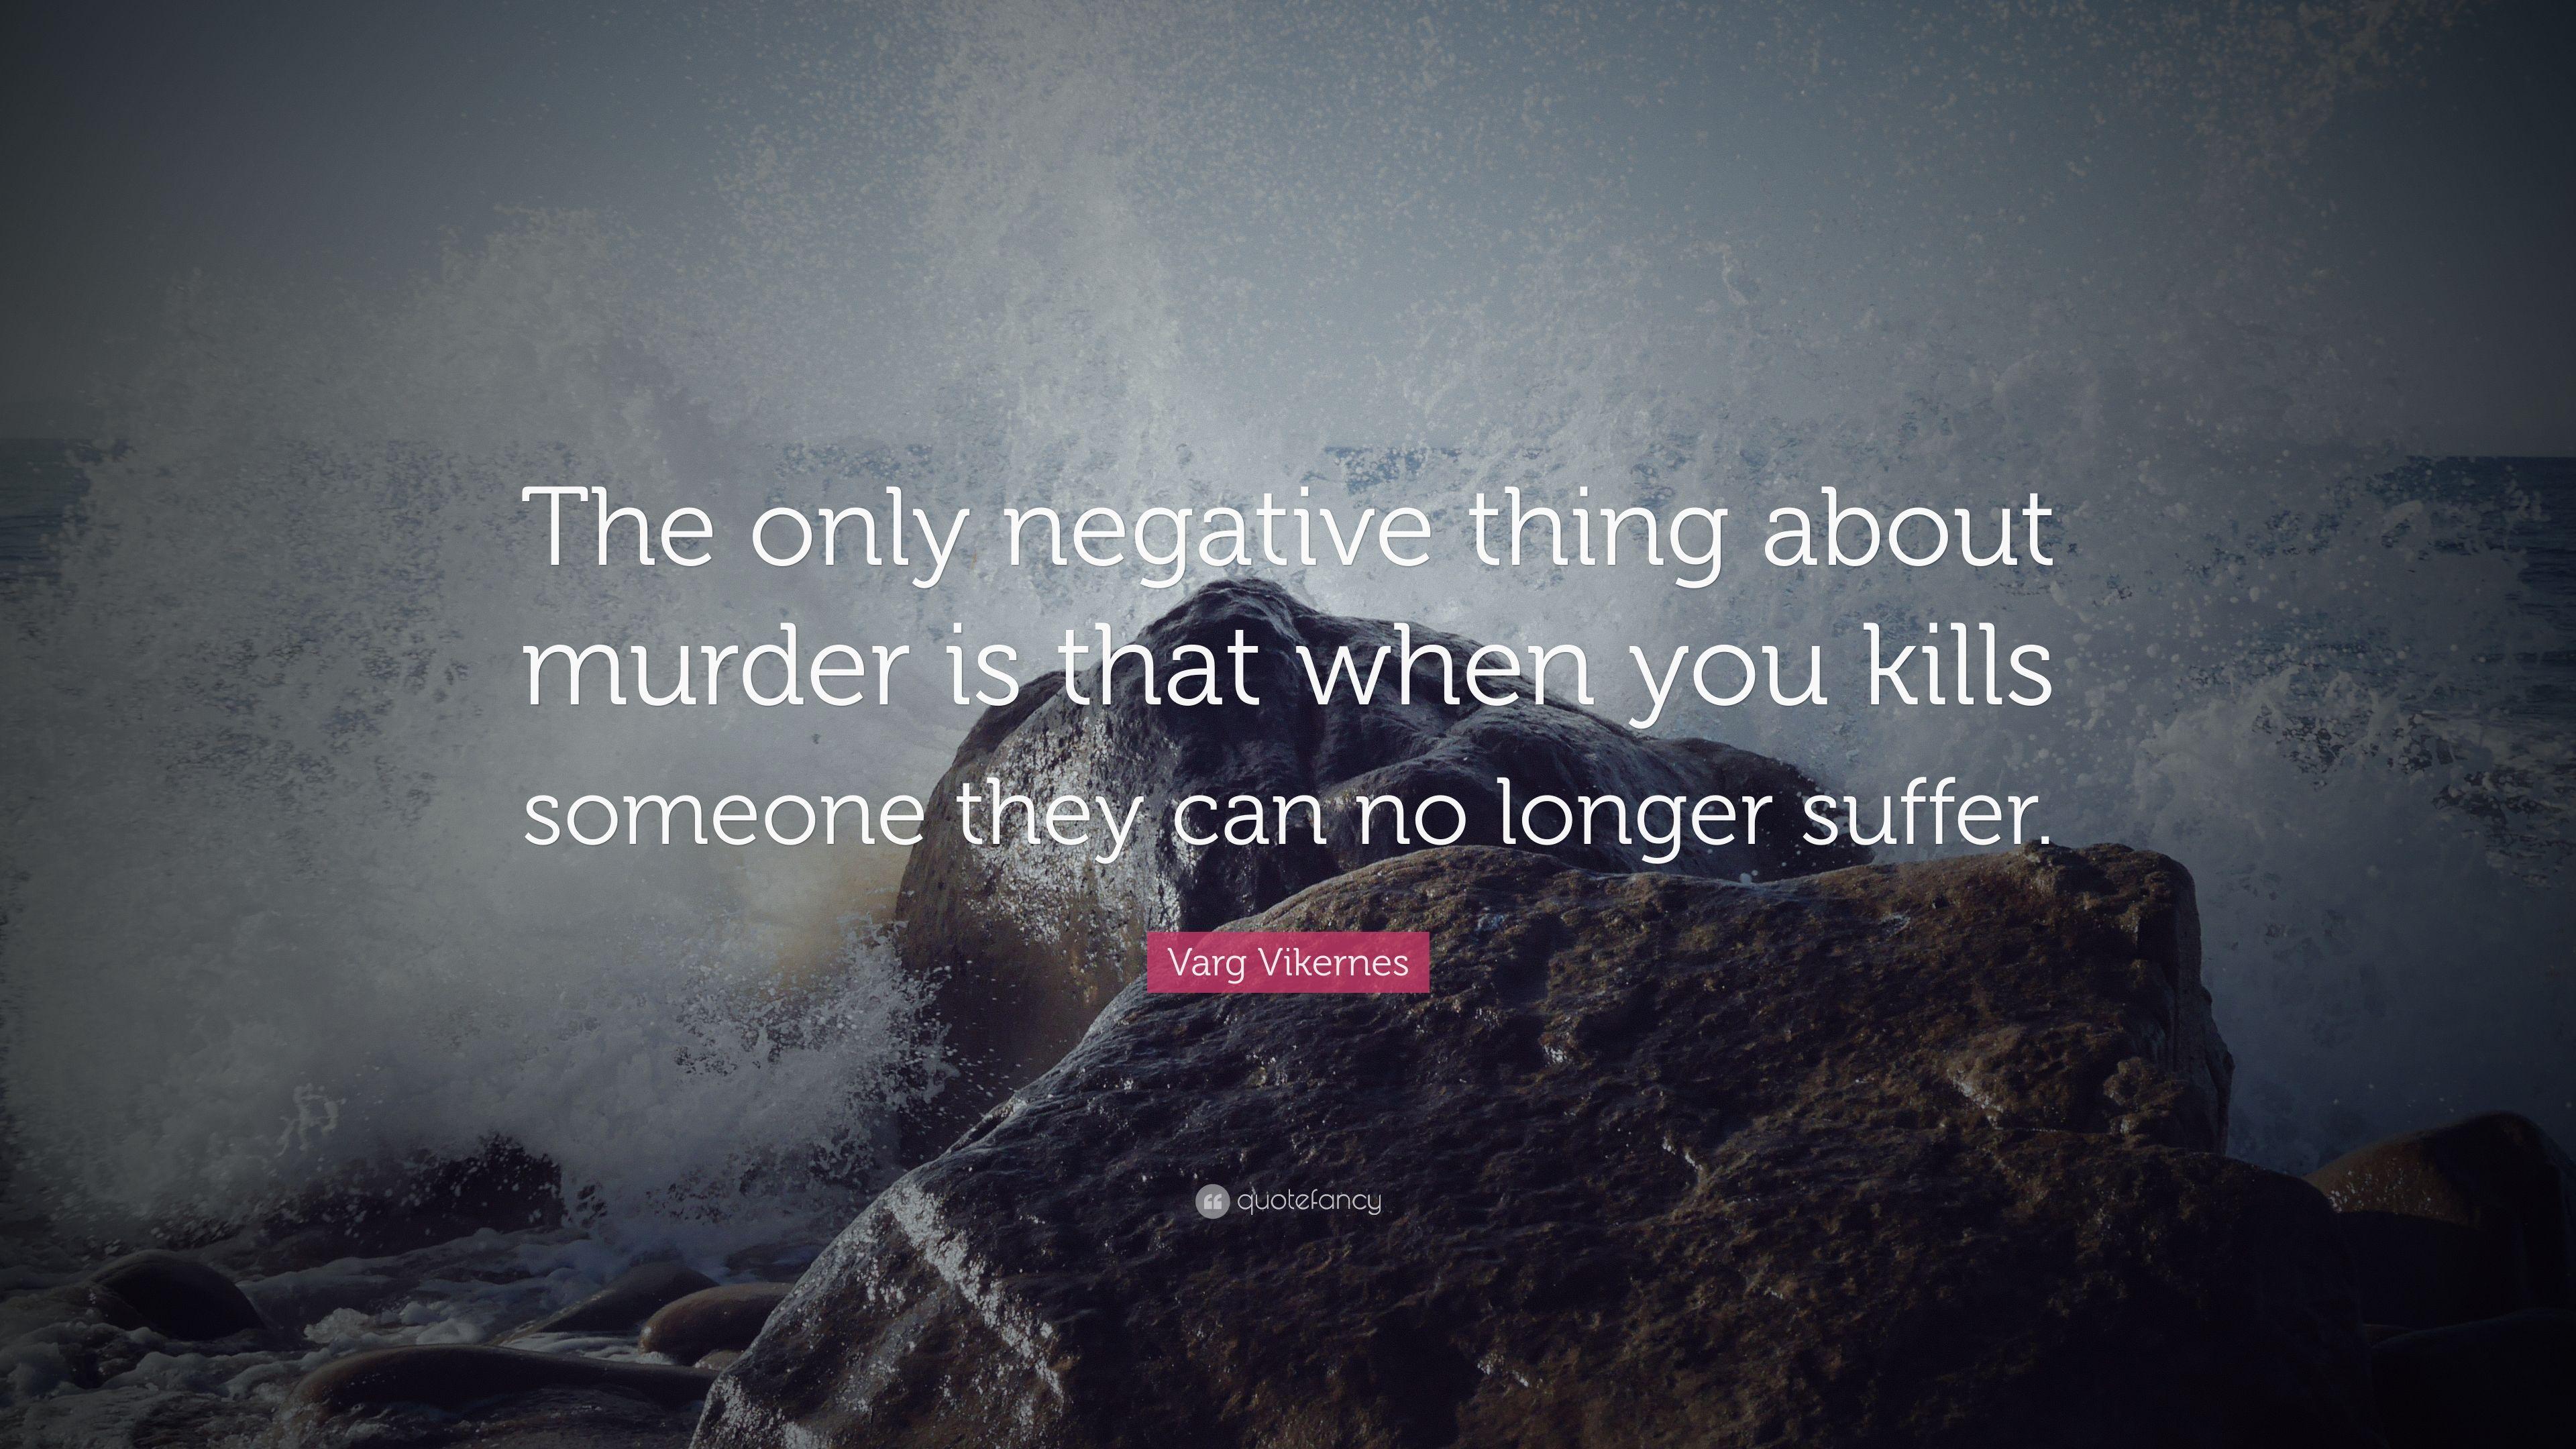 Varg Vikernes Quote: “The only negative thing about murder is that